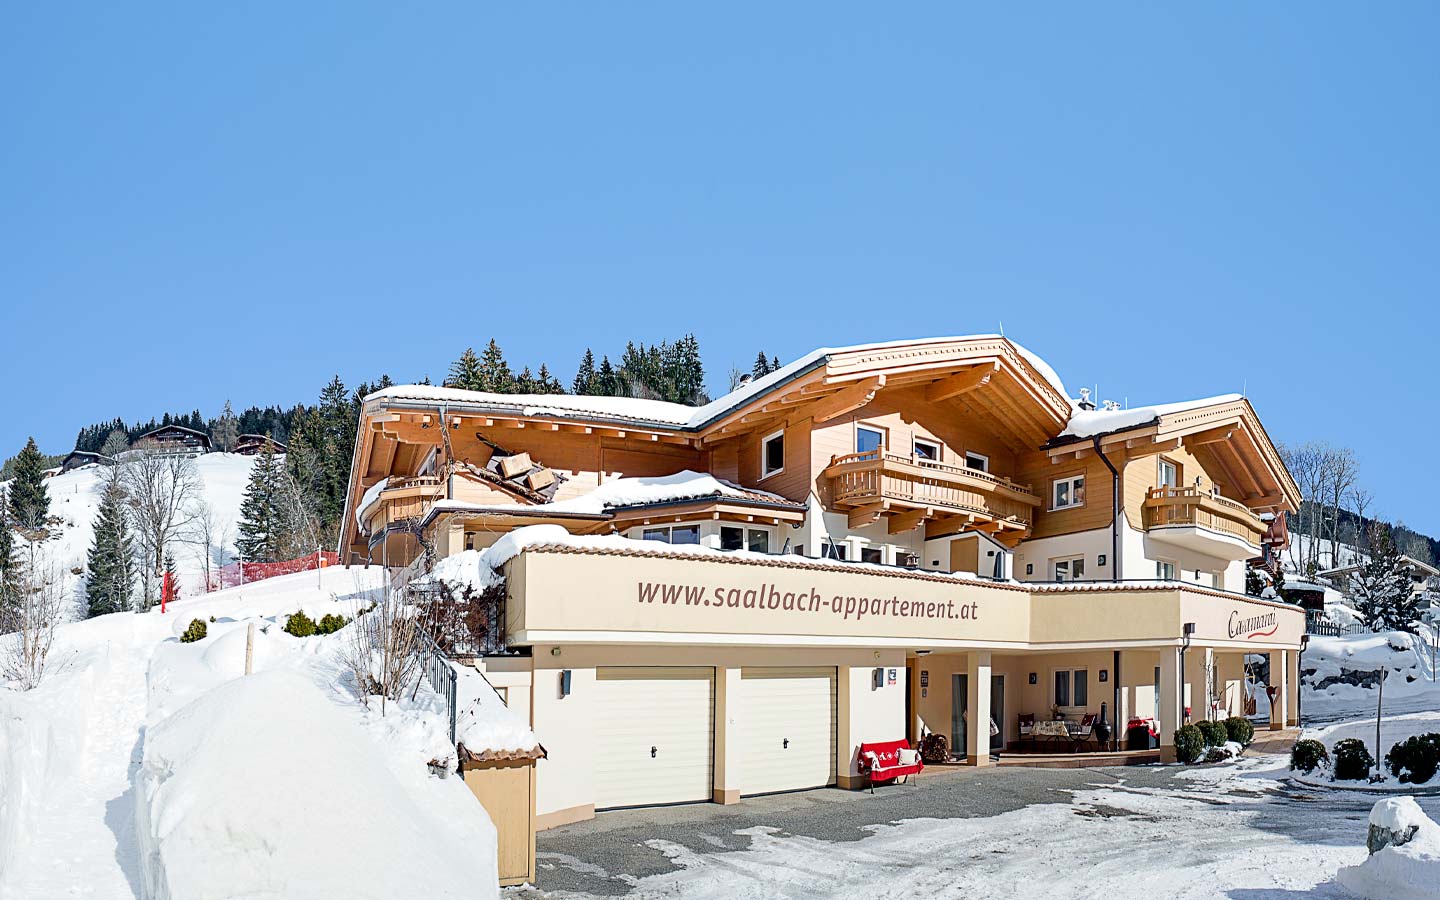 (c) Saalbach-appartement.at